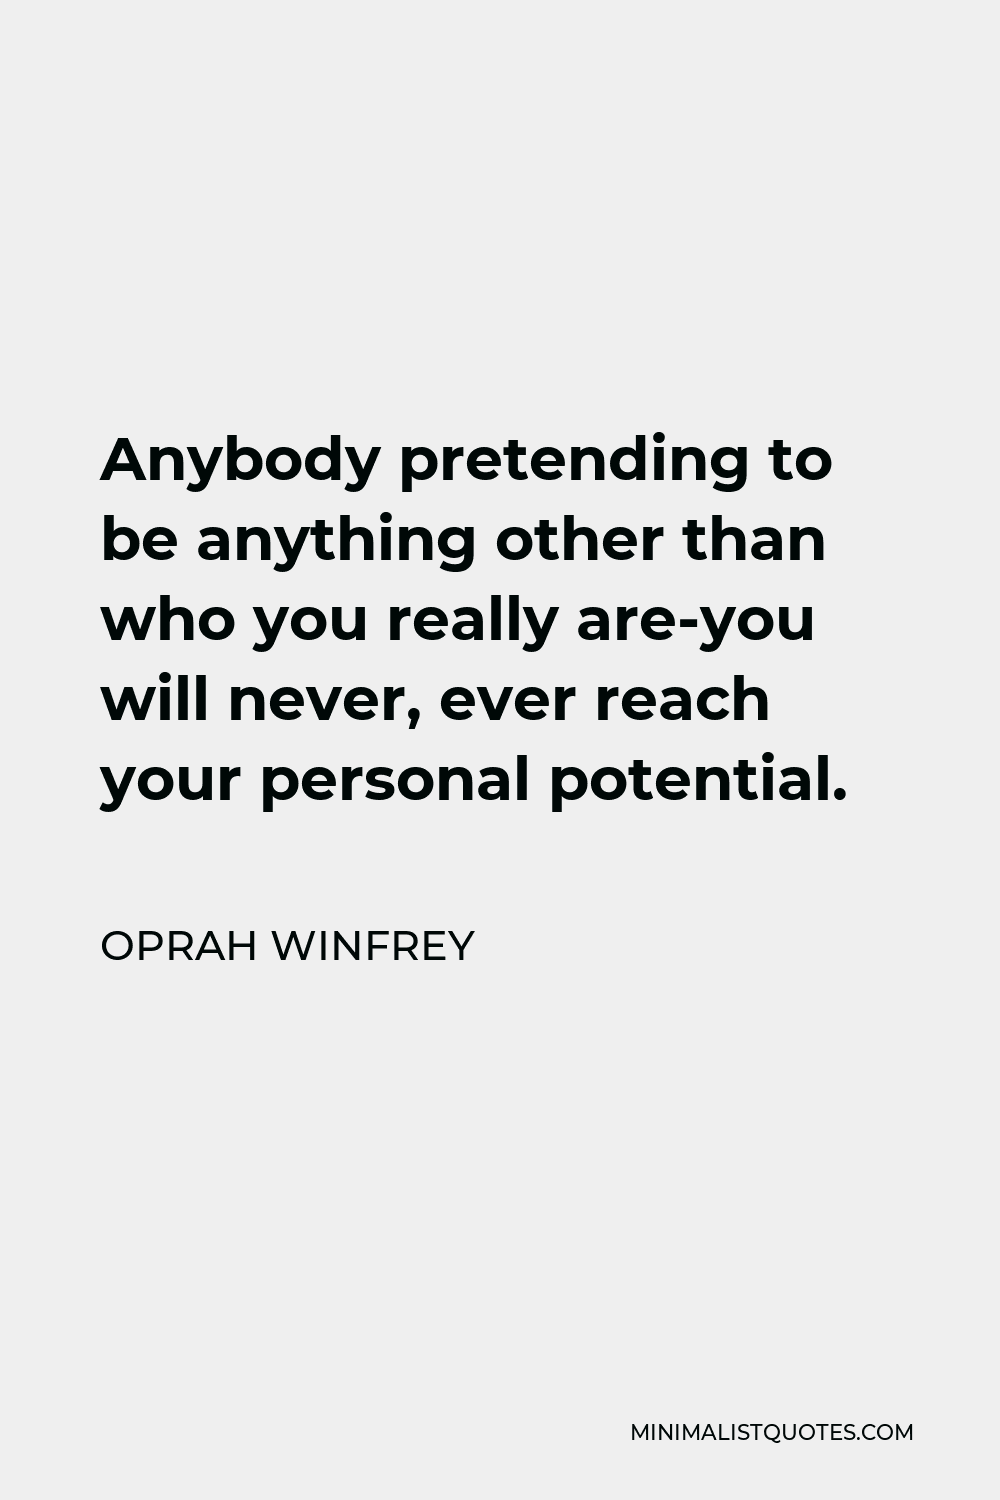 Oprah Winfrey Quote - Anybody pretending to be anything other than who you really are-you will never, ever reach your personal potential.